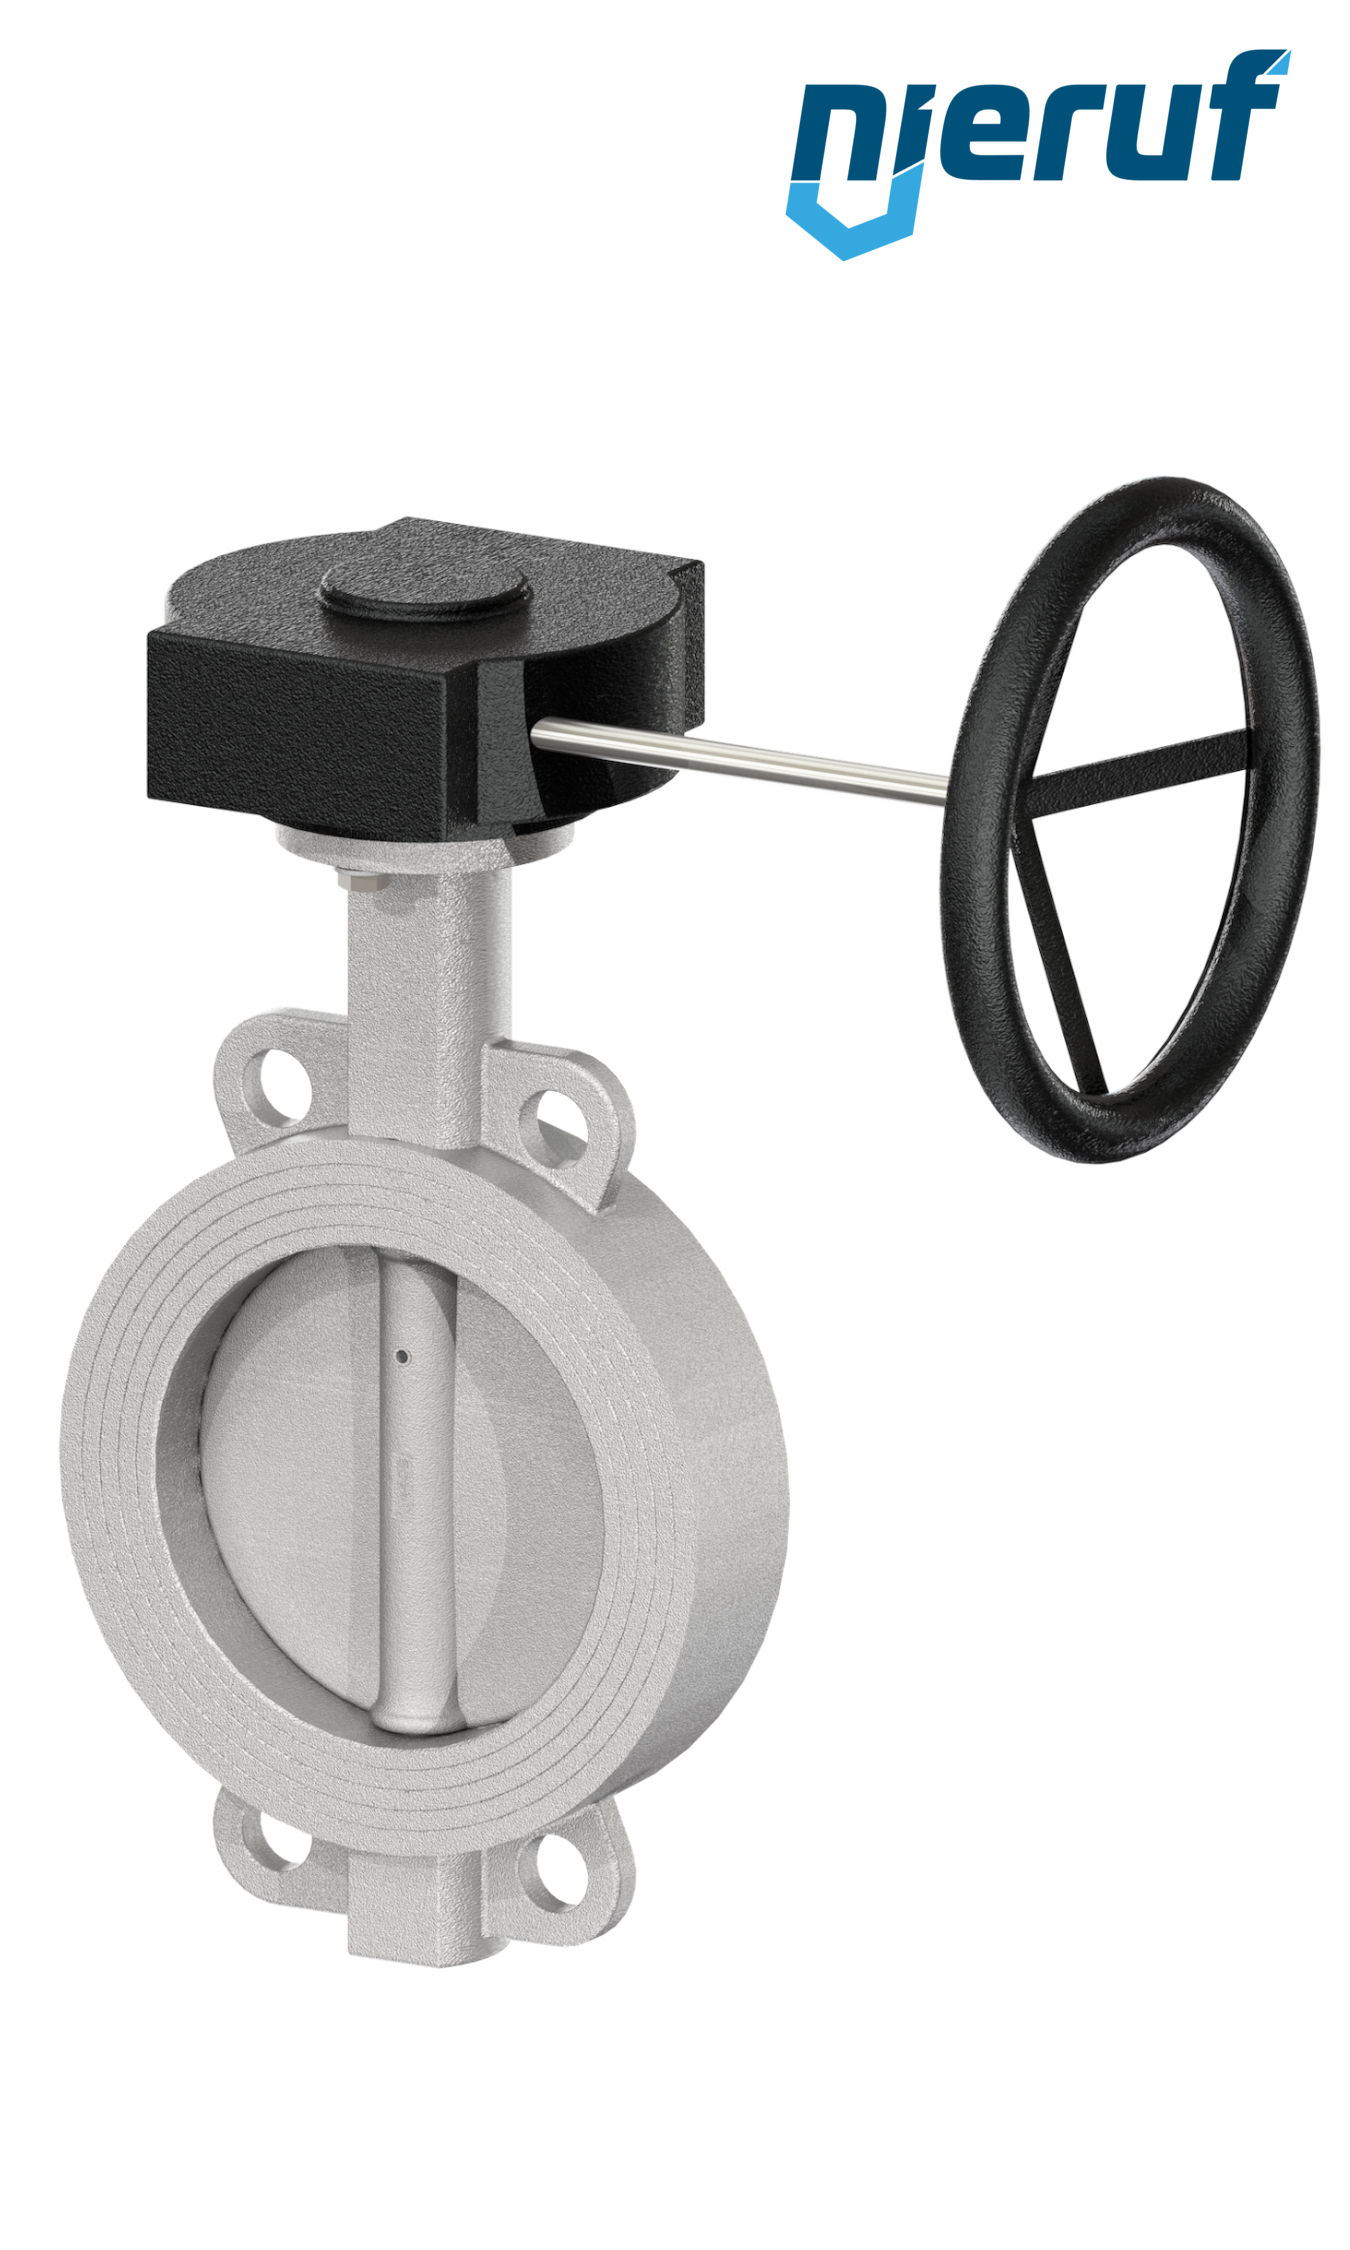 Butterfly-valve-stainless-steel DN 80 PN16 AK08 metall gearbox